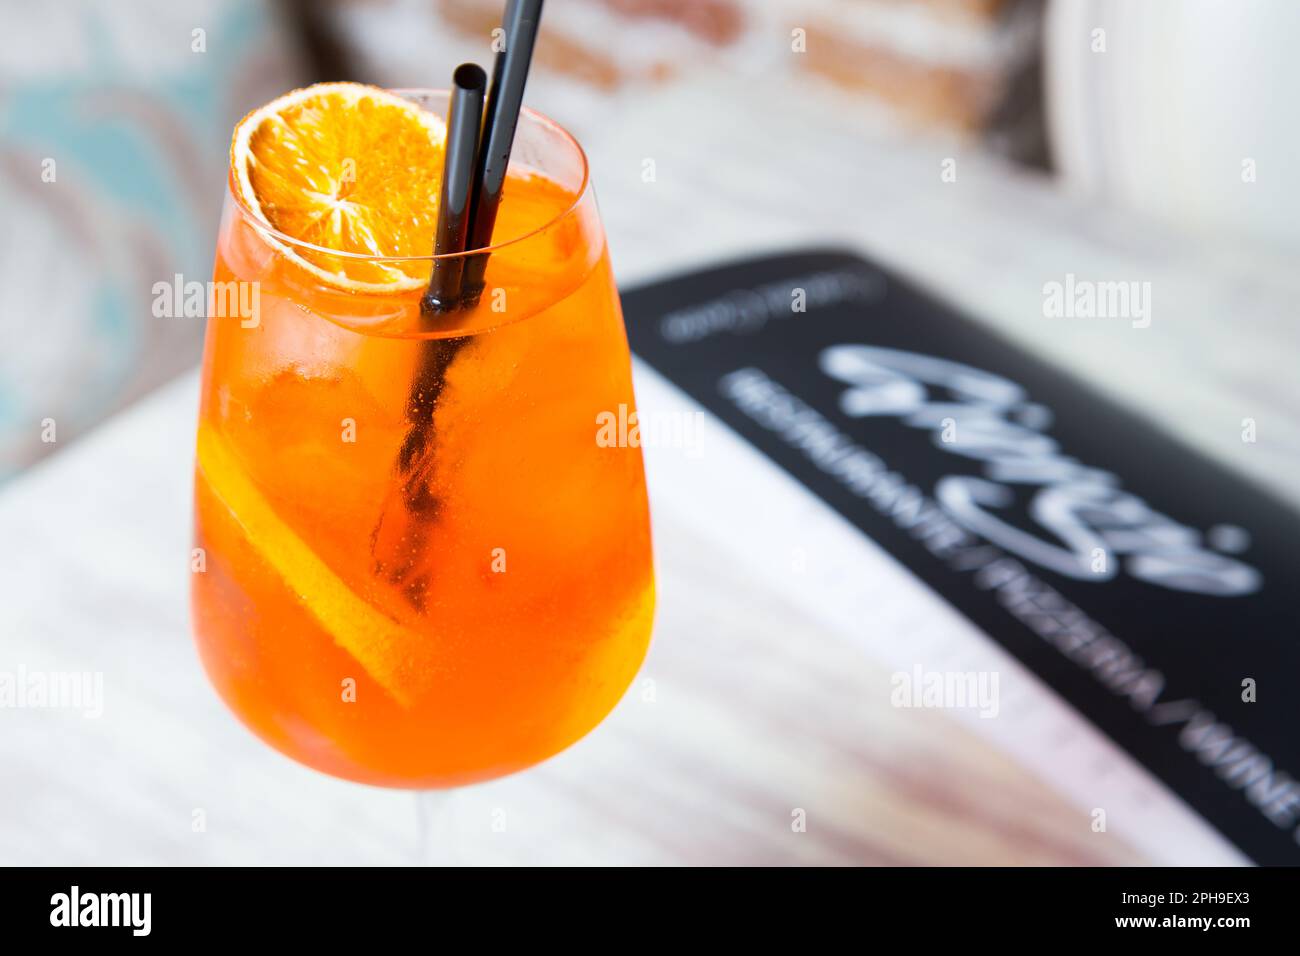 The Aperol Spritz is a well-known Italian long drink typical of the aperitif that mixes Aperol, prosecco and soda. Stock Photo